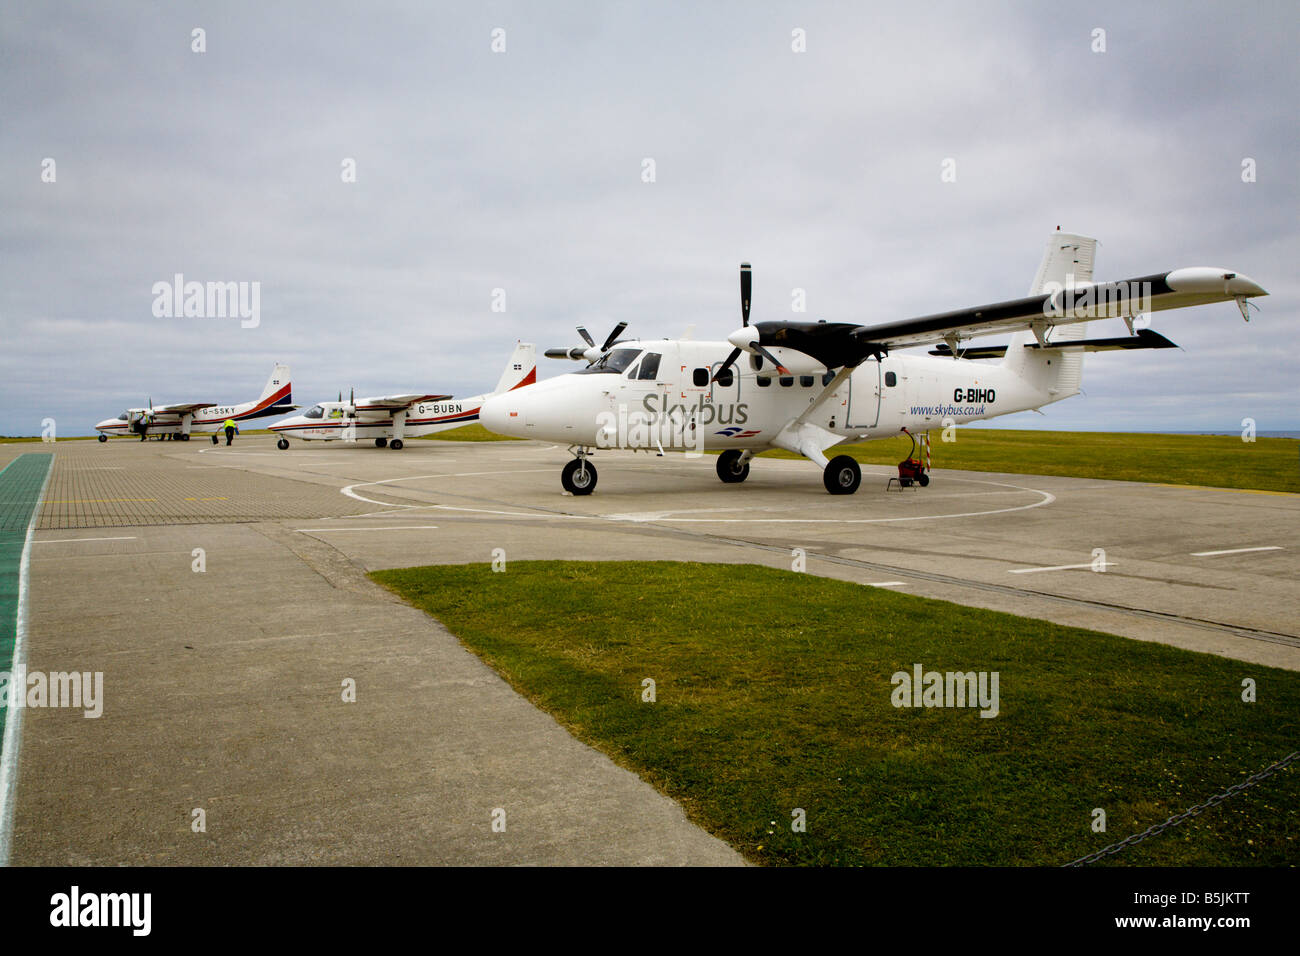 Isles of Scilly Skybus DeHavilland Twin Otter Banque D'Images